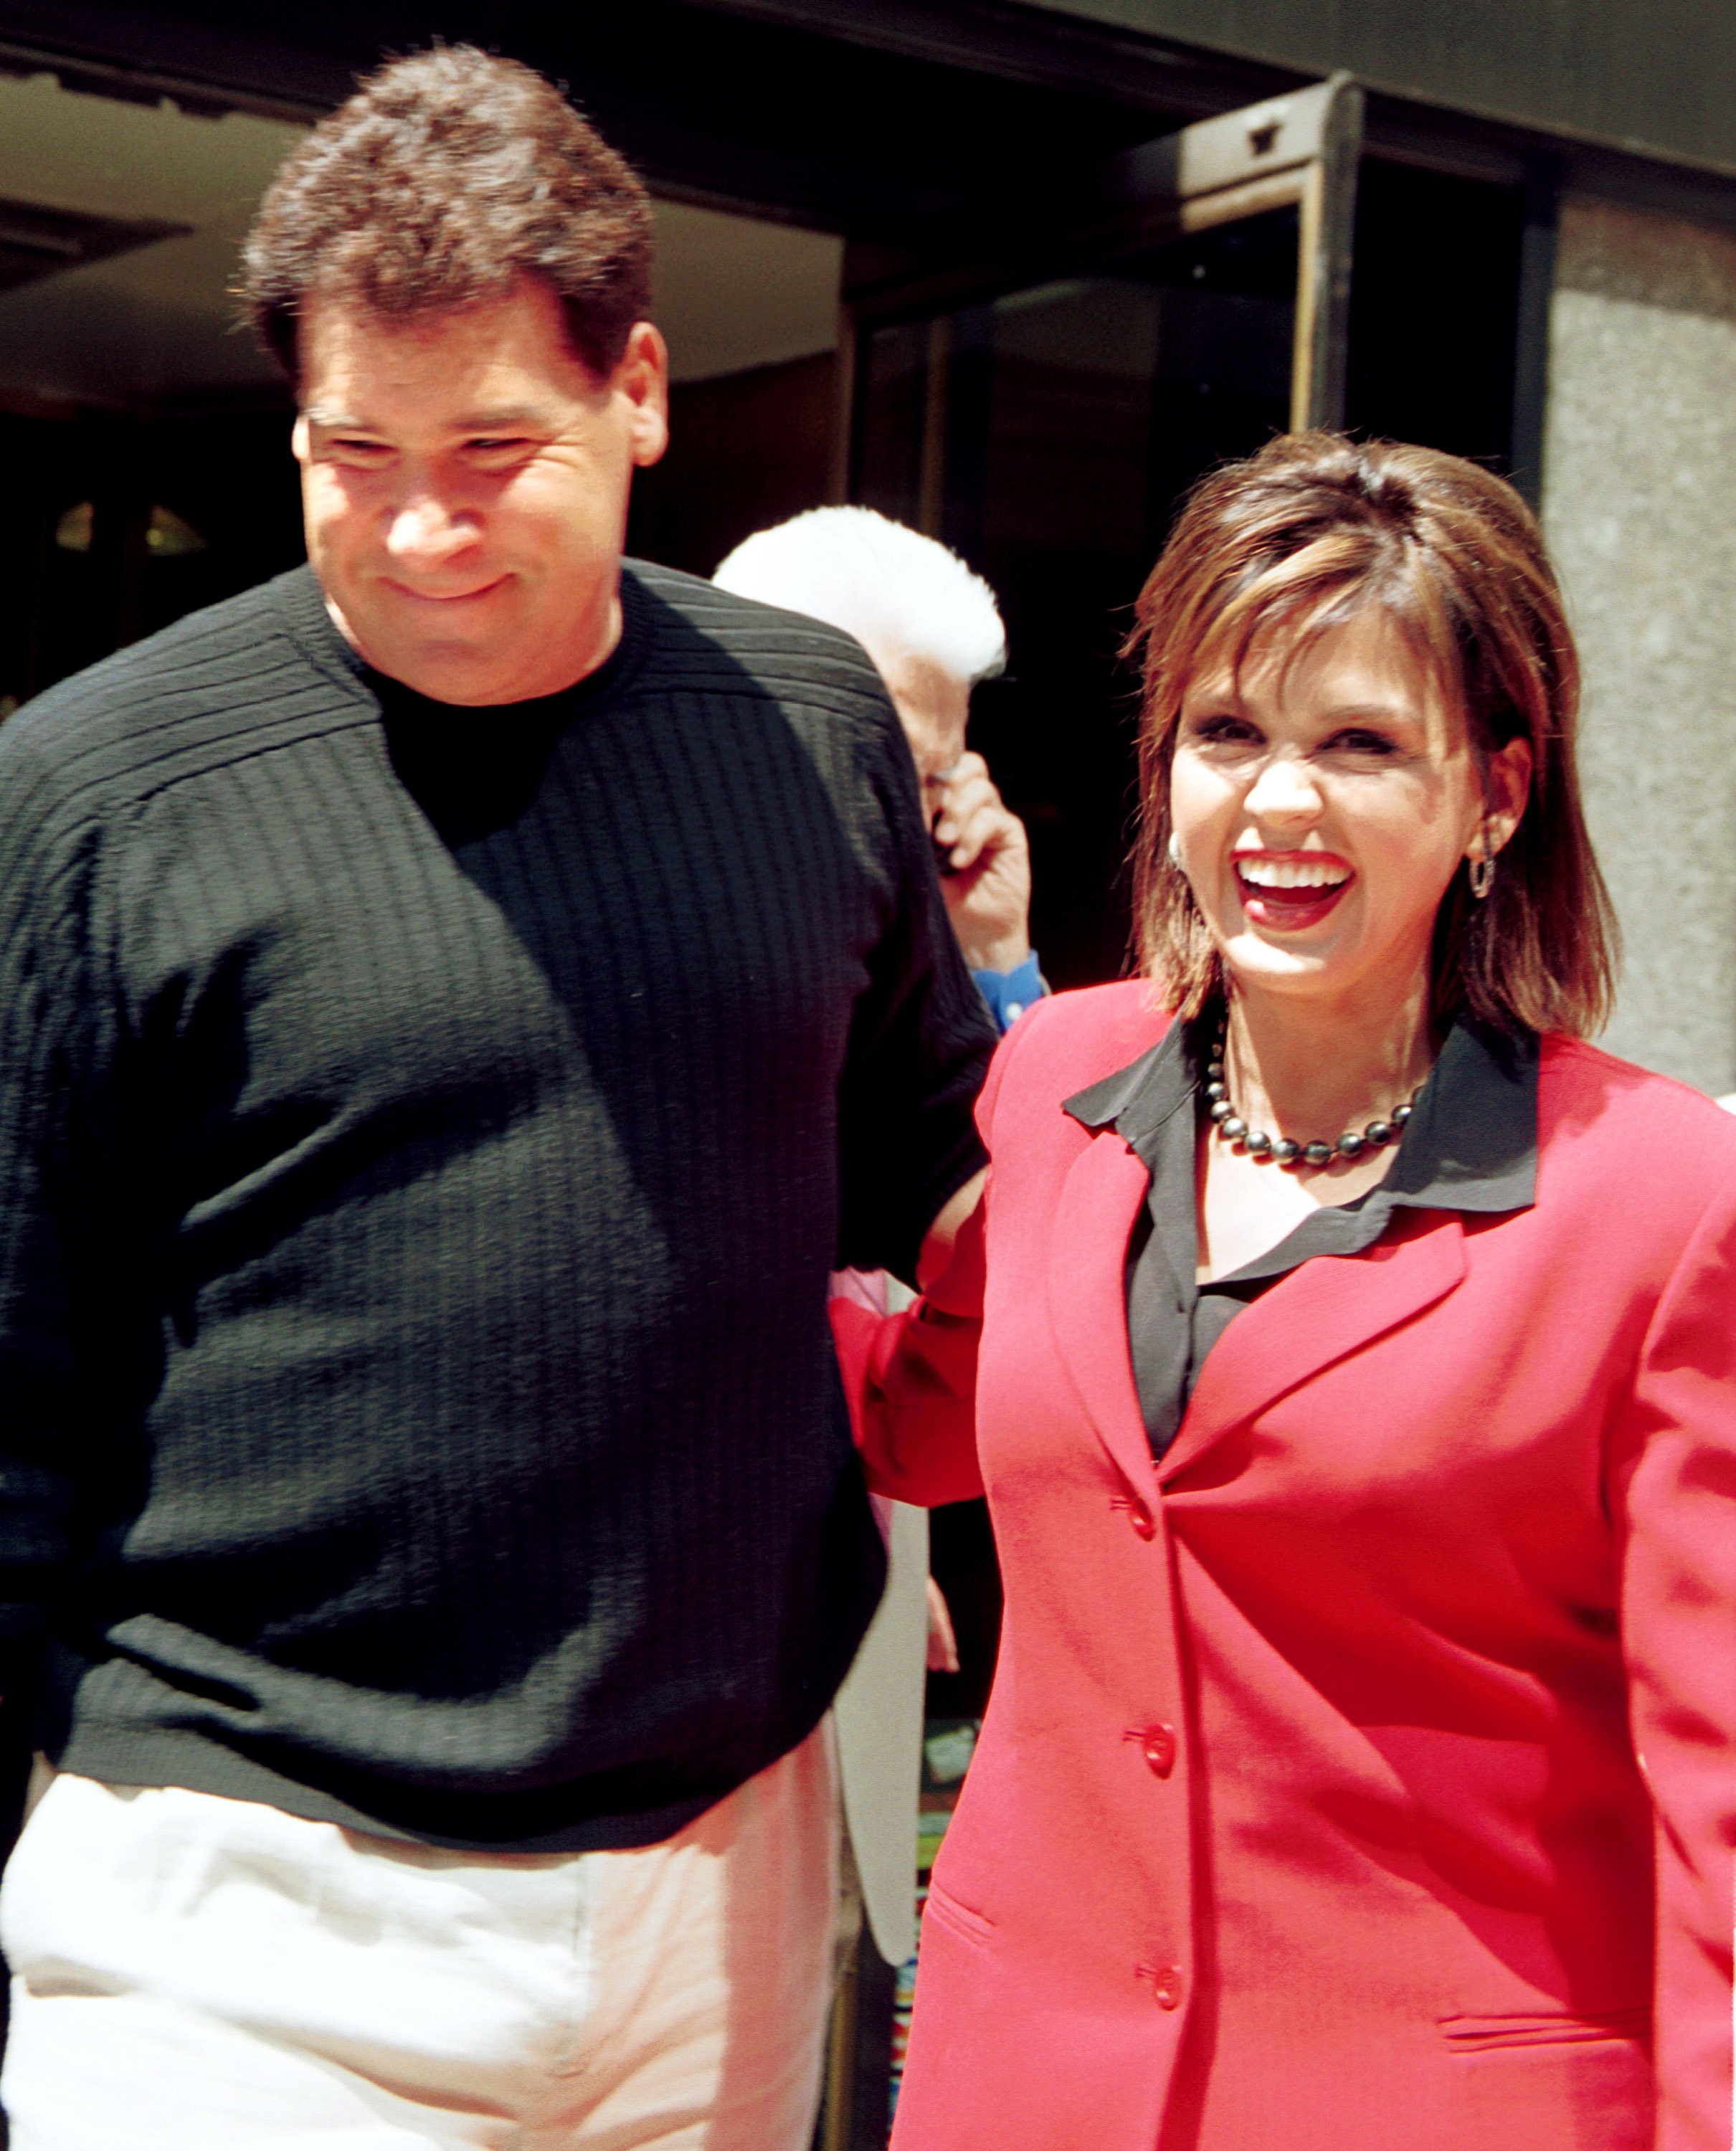 Marie Osmond and her husband Brian Blosil leave a book signing for her new book "Behind the Smile" May 1, 2001 in New York City | Source: Getty Images